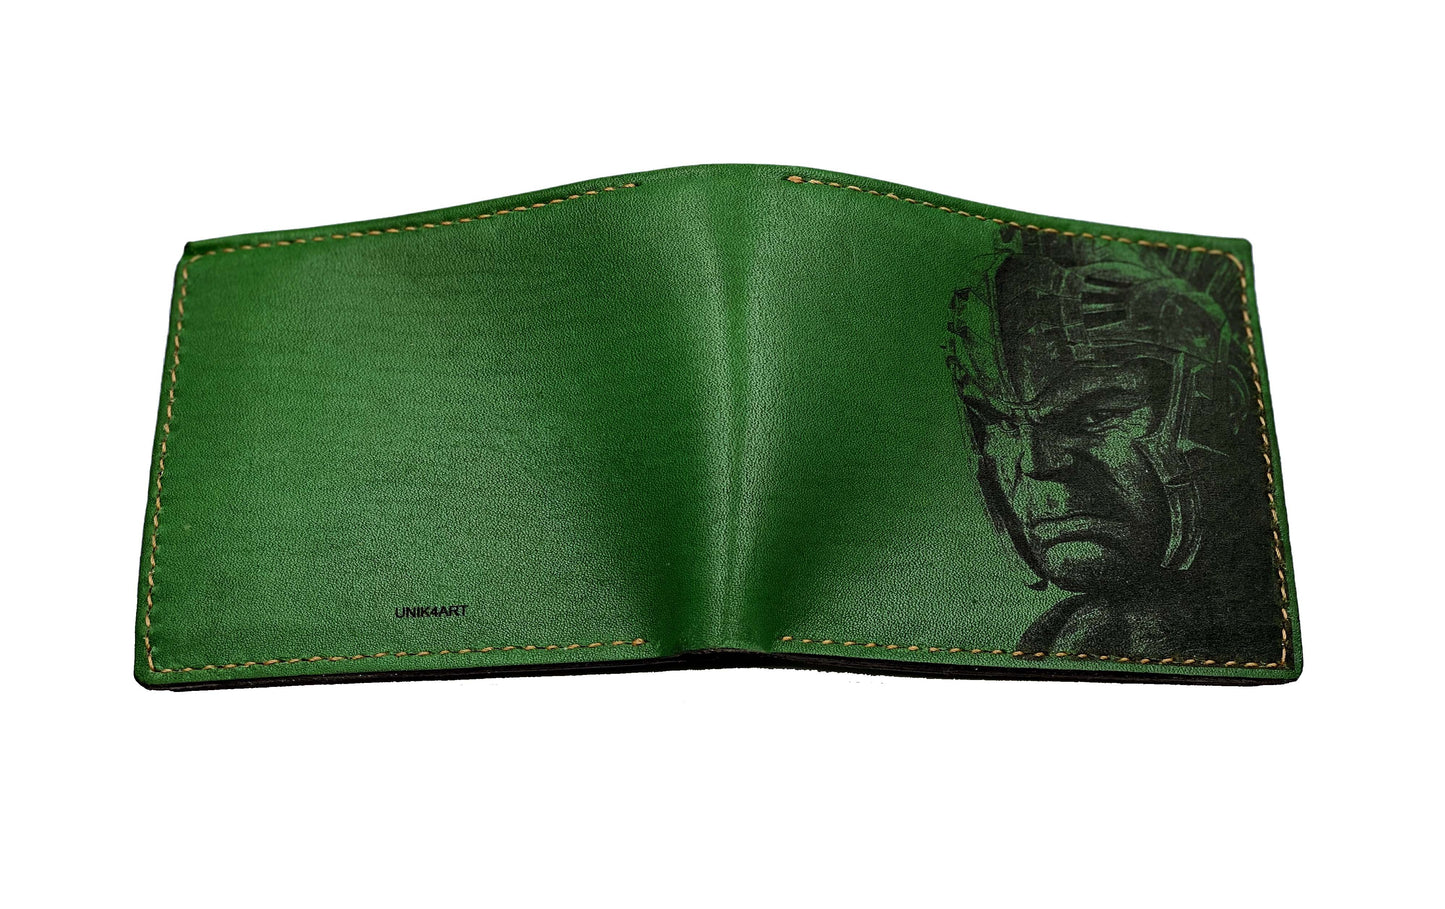 Mayan Corner - Hulk the Green warrior superheroes leather handmade men's wallet, custom gifts for him, father's day gifts